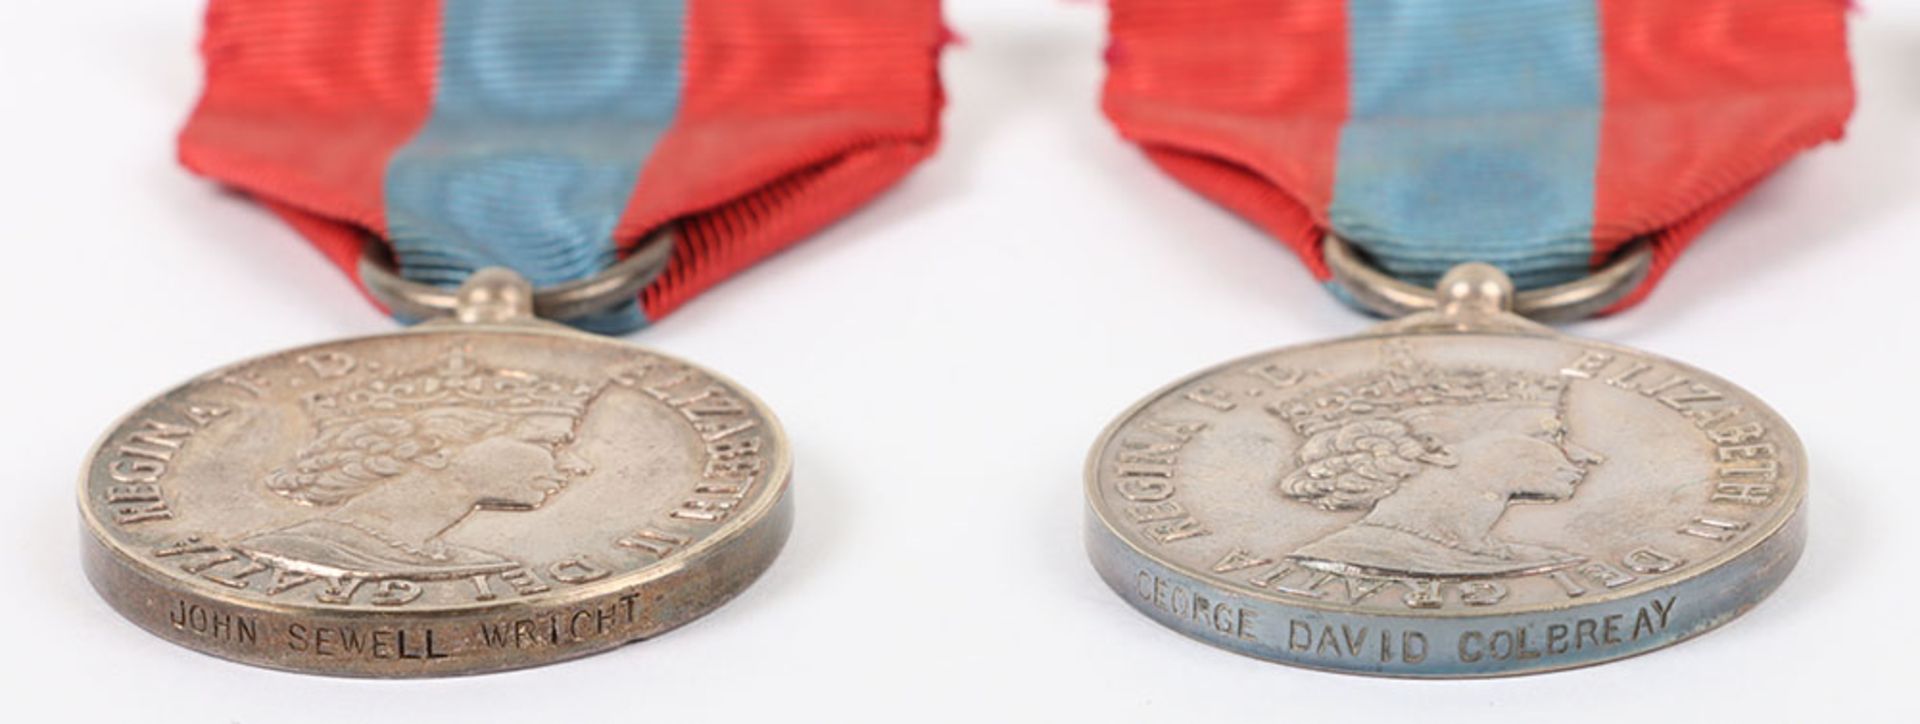 4x Elizabeth II Imperial Service Medals - Image 3 of 6